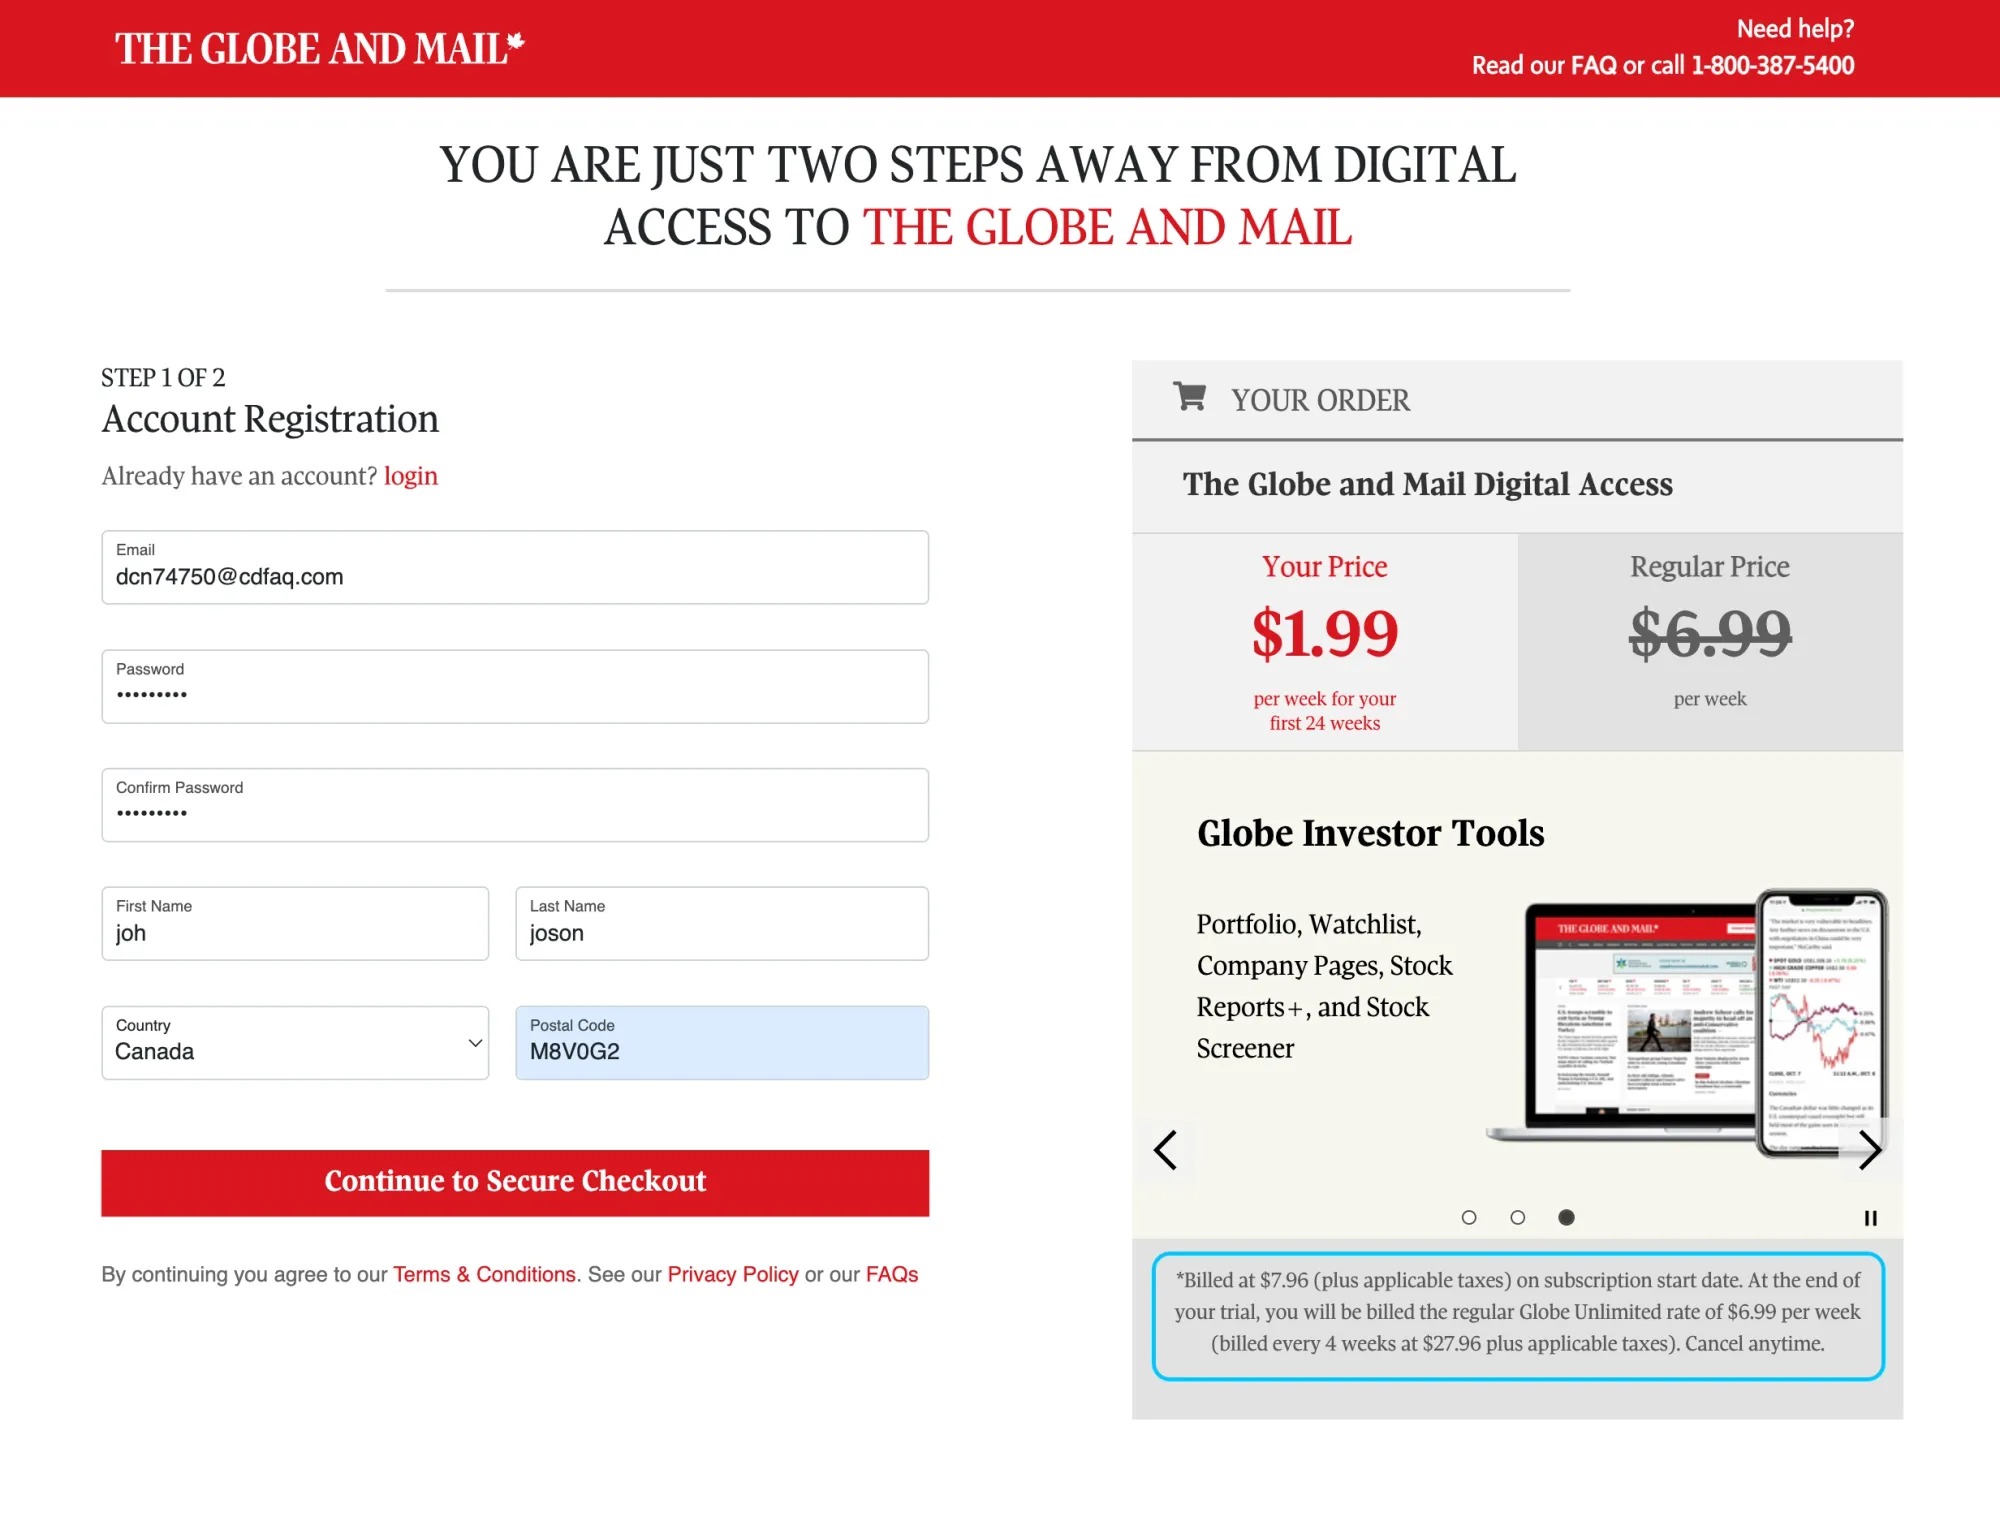 The Globe and Mail account creation page